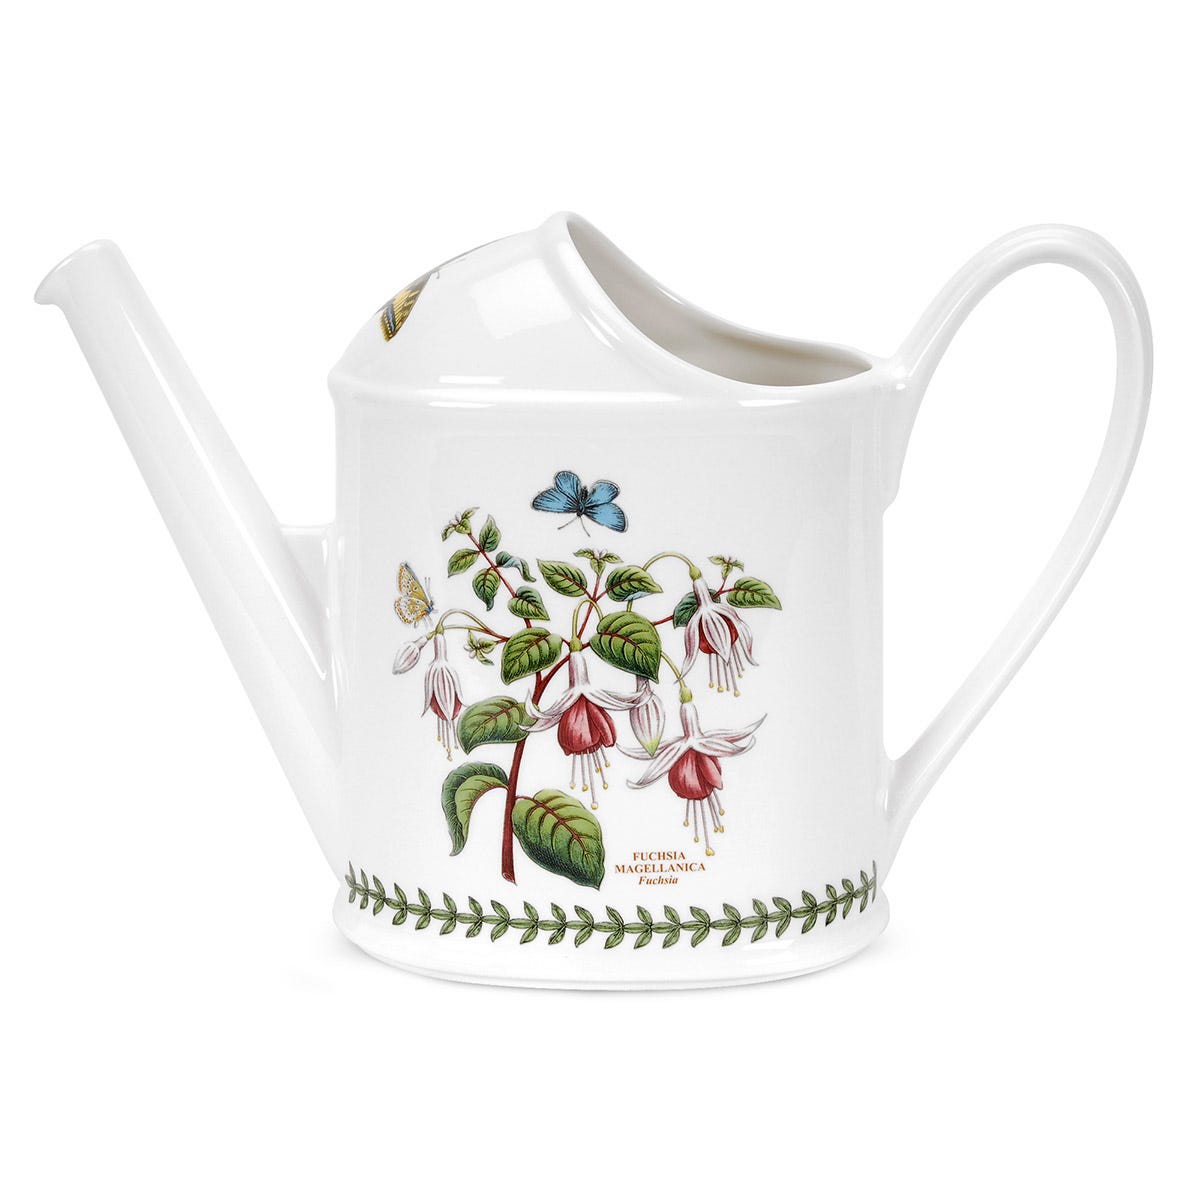 Accentuate Your Garden with the Portmeirion Botanic Garden Watering Can